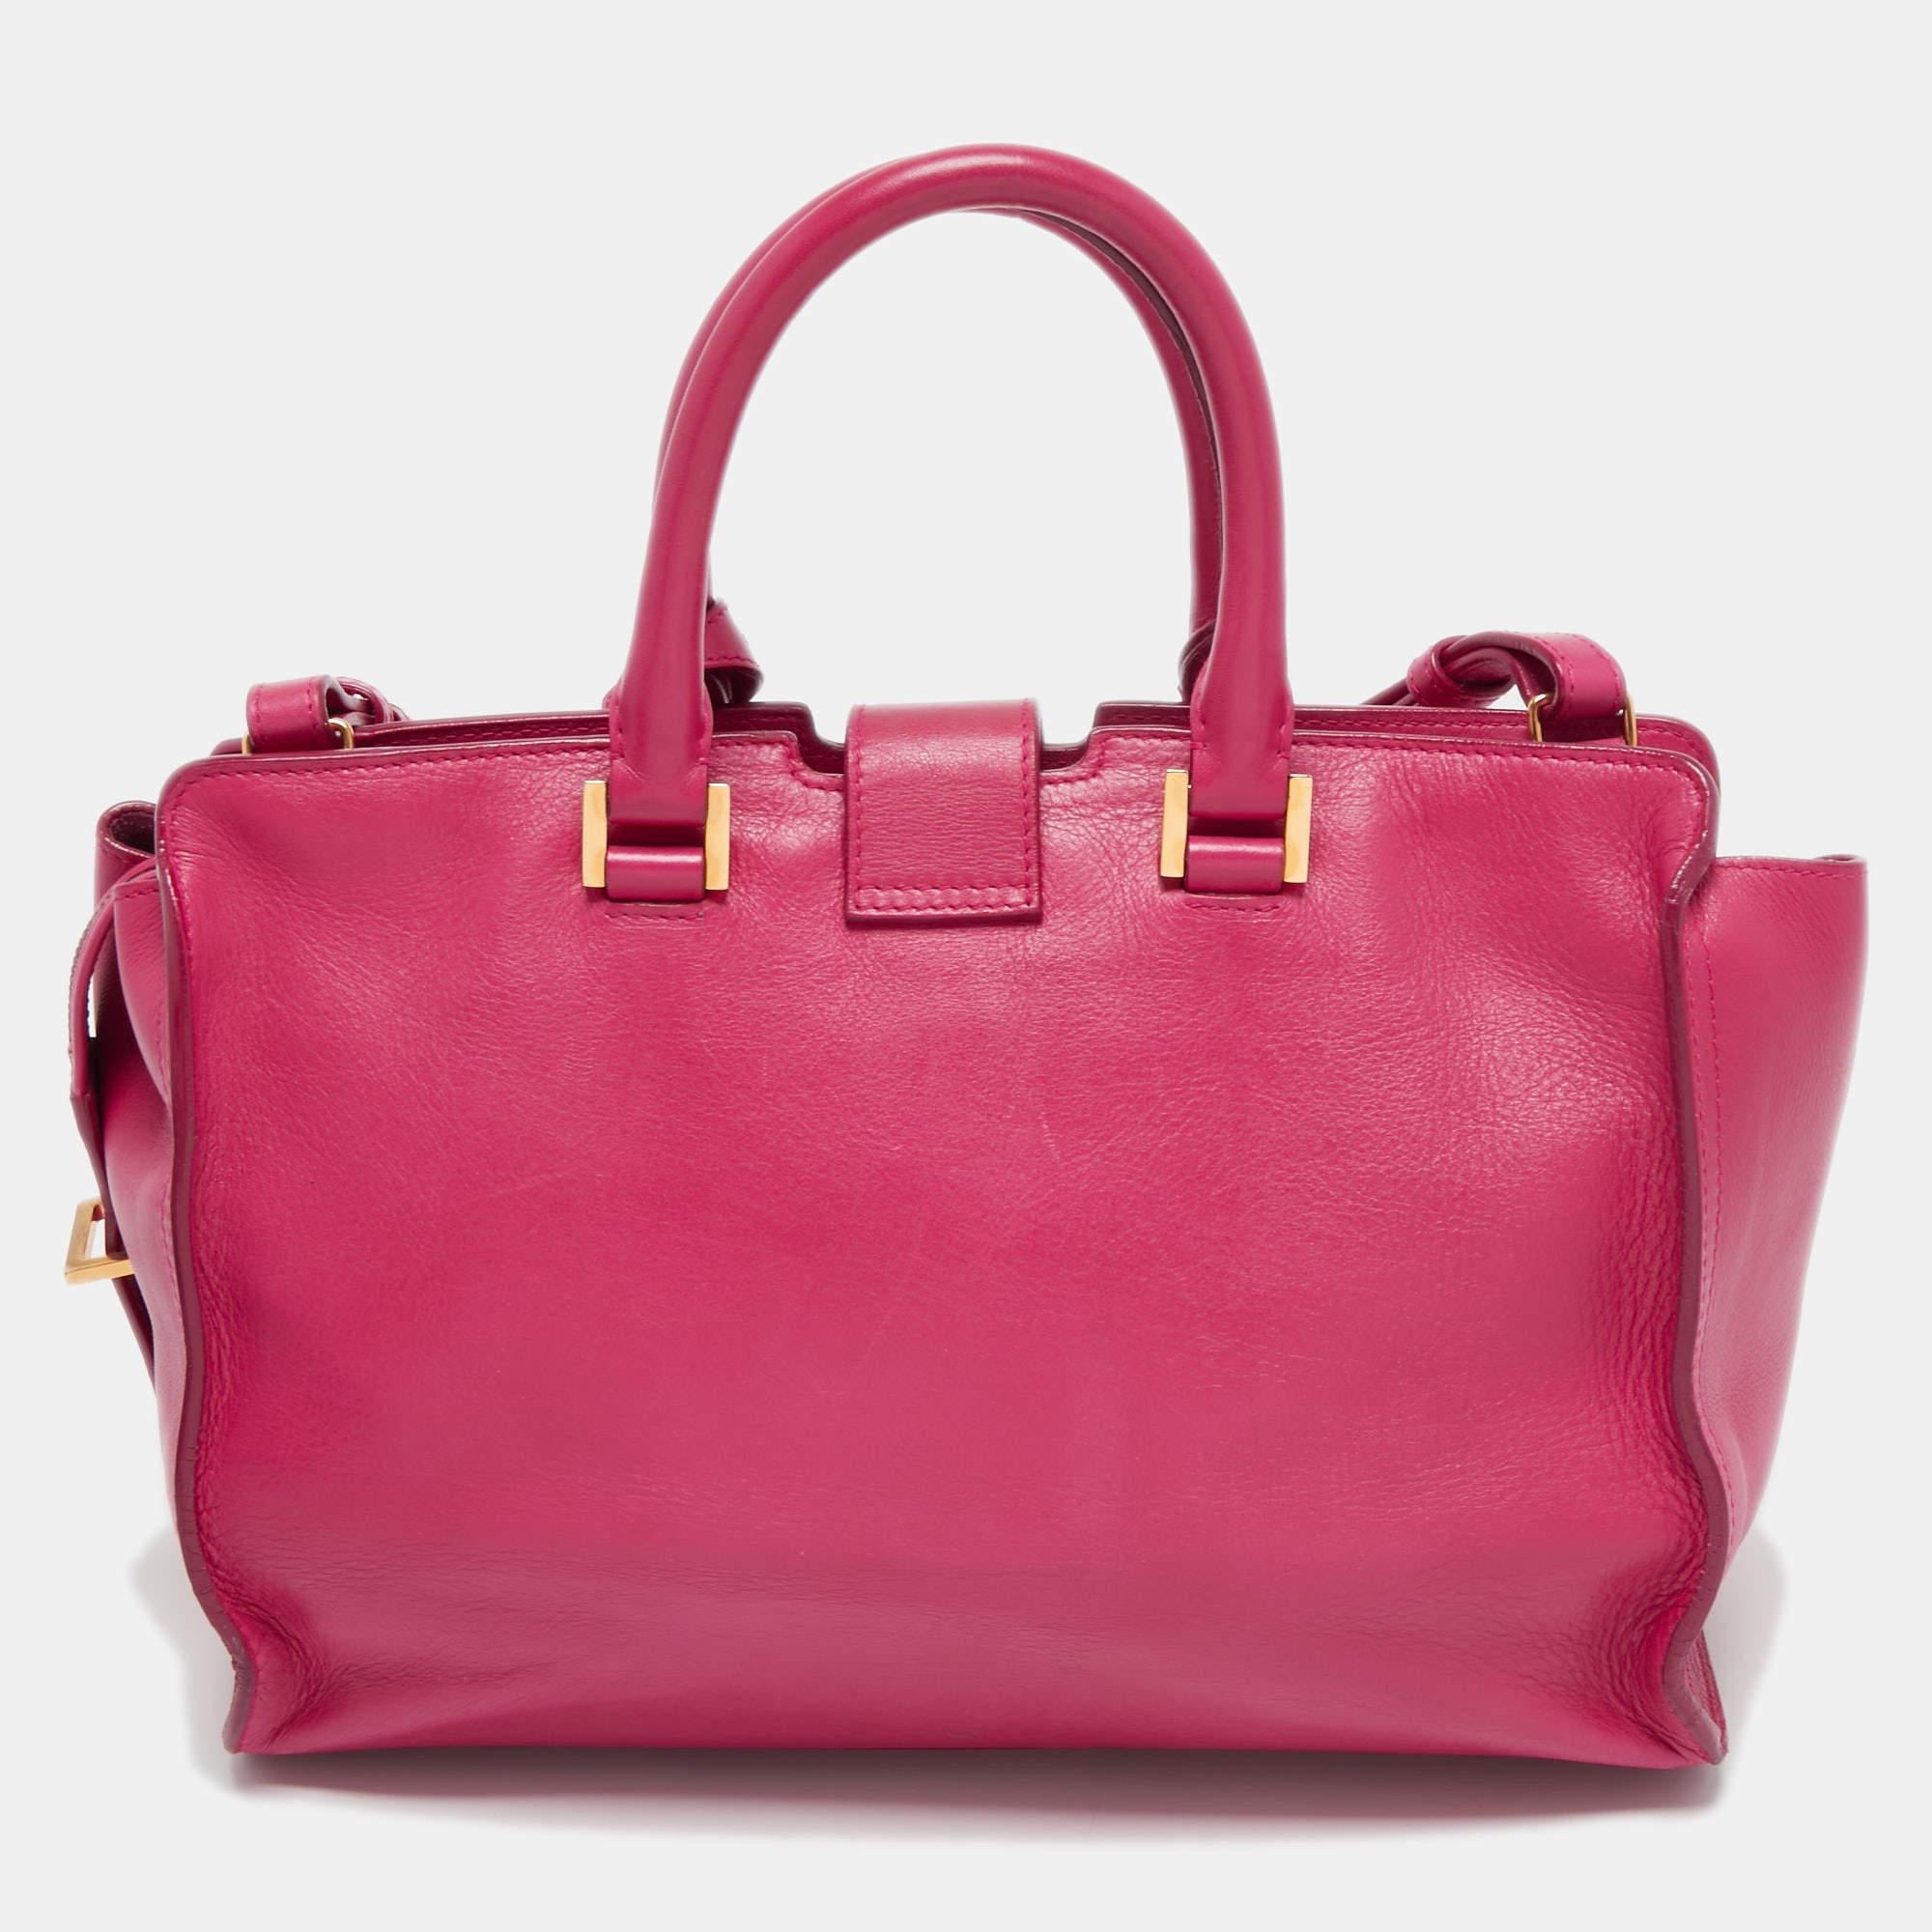 This elegant Pink Cabas Chyc tote from Saint Laurent is ideal for everyday use. Crafted from leather, the bag is detailed with a hold tone hardware Y motif snap closure, and dual rolled handles. The top zip closure opens to a spacious interior that